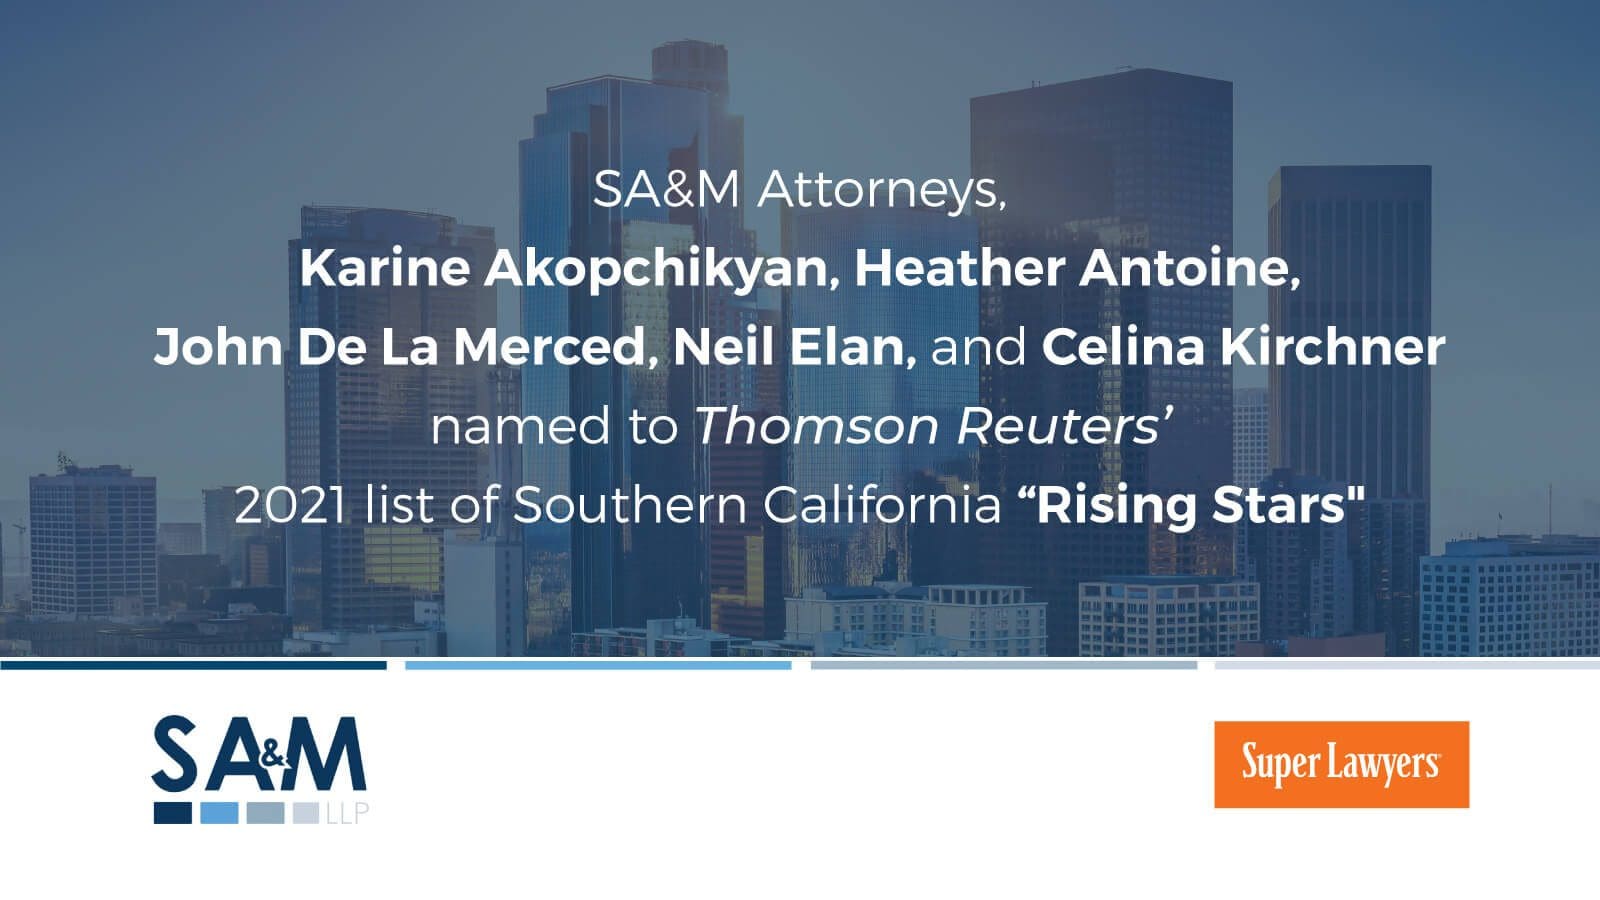 Five SA&M Attorneys Named Southern California Rising Stars for 2021 by Thomson Reuters